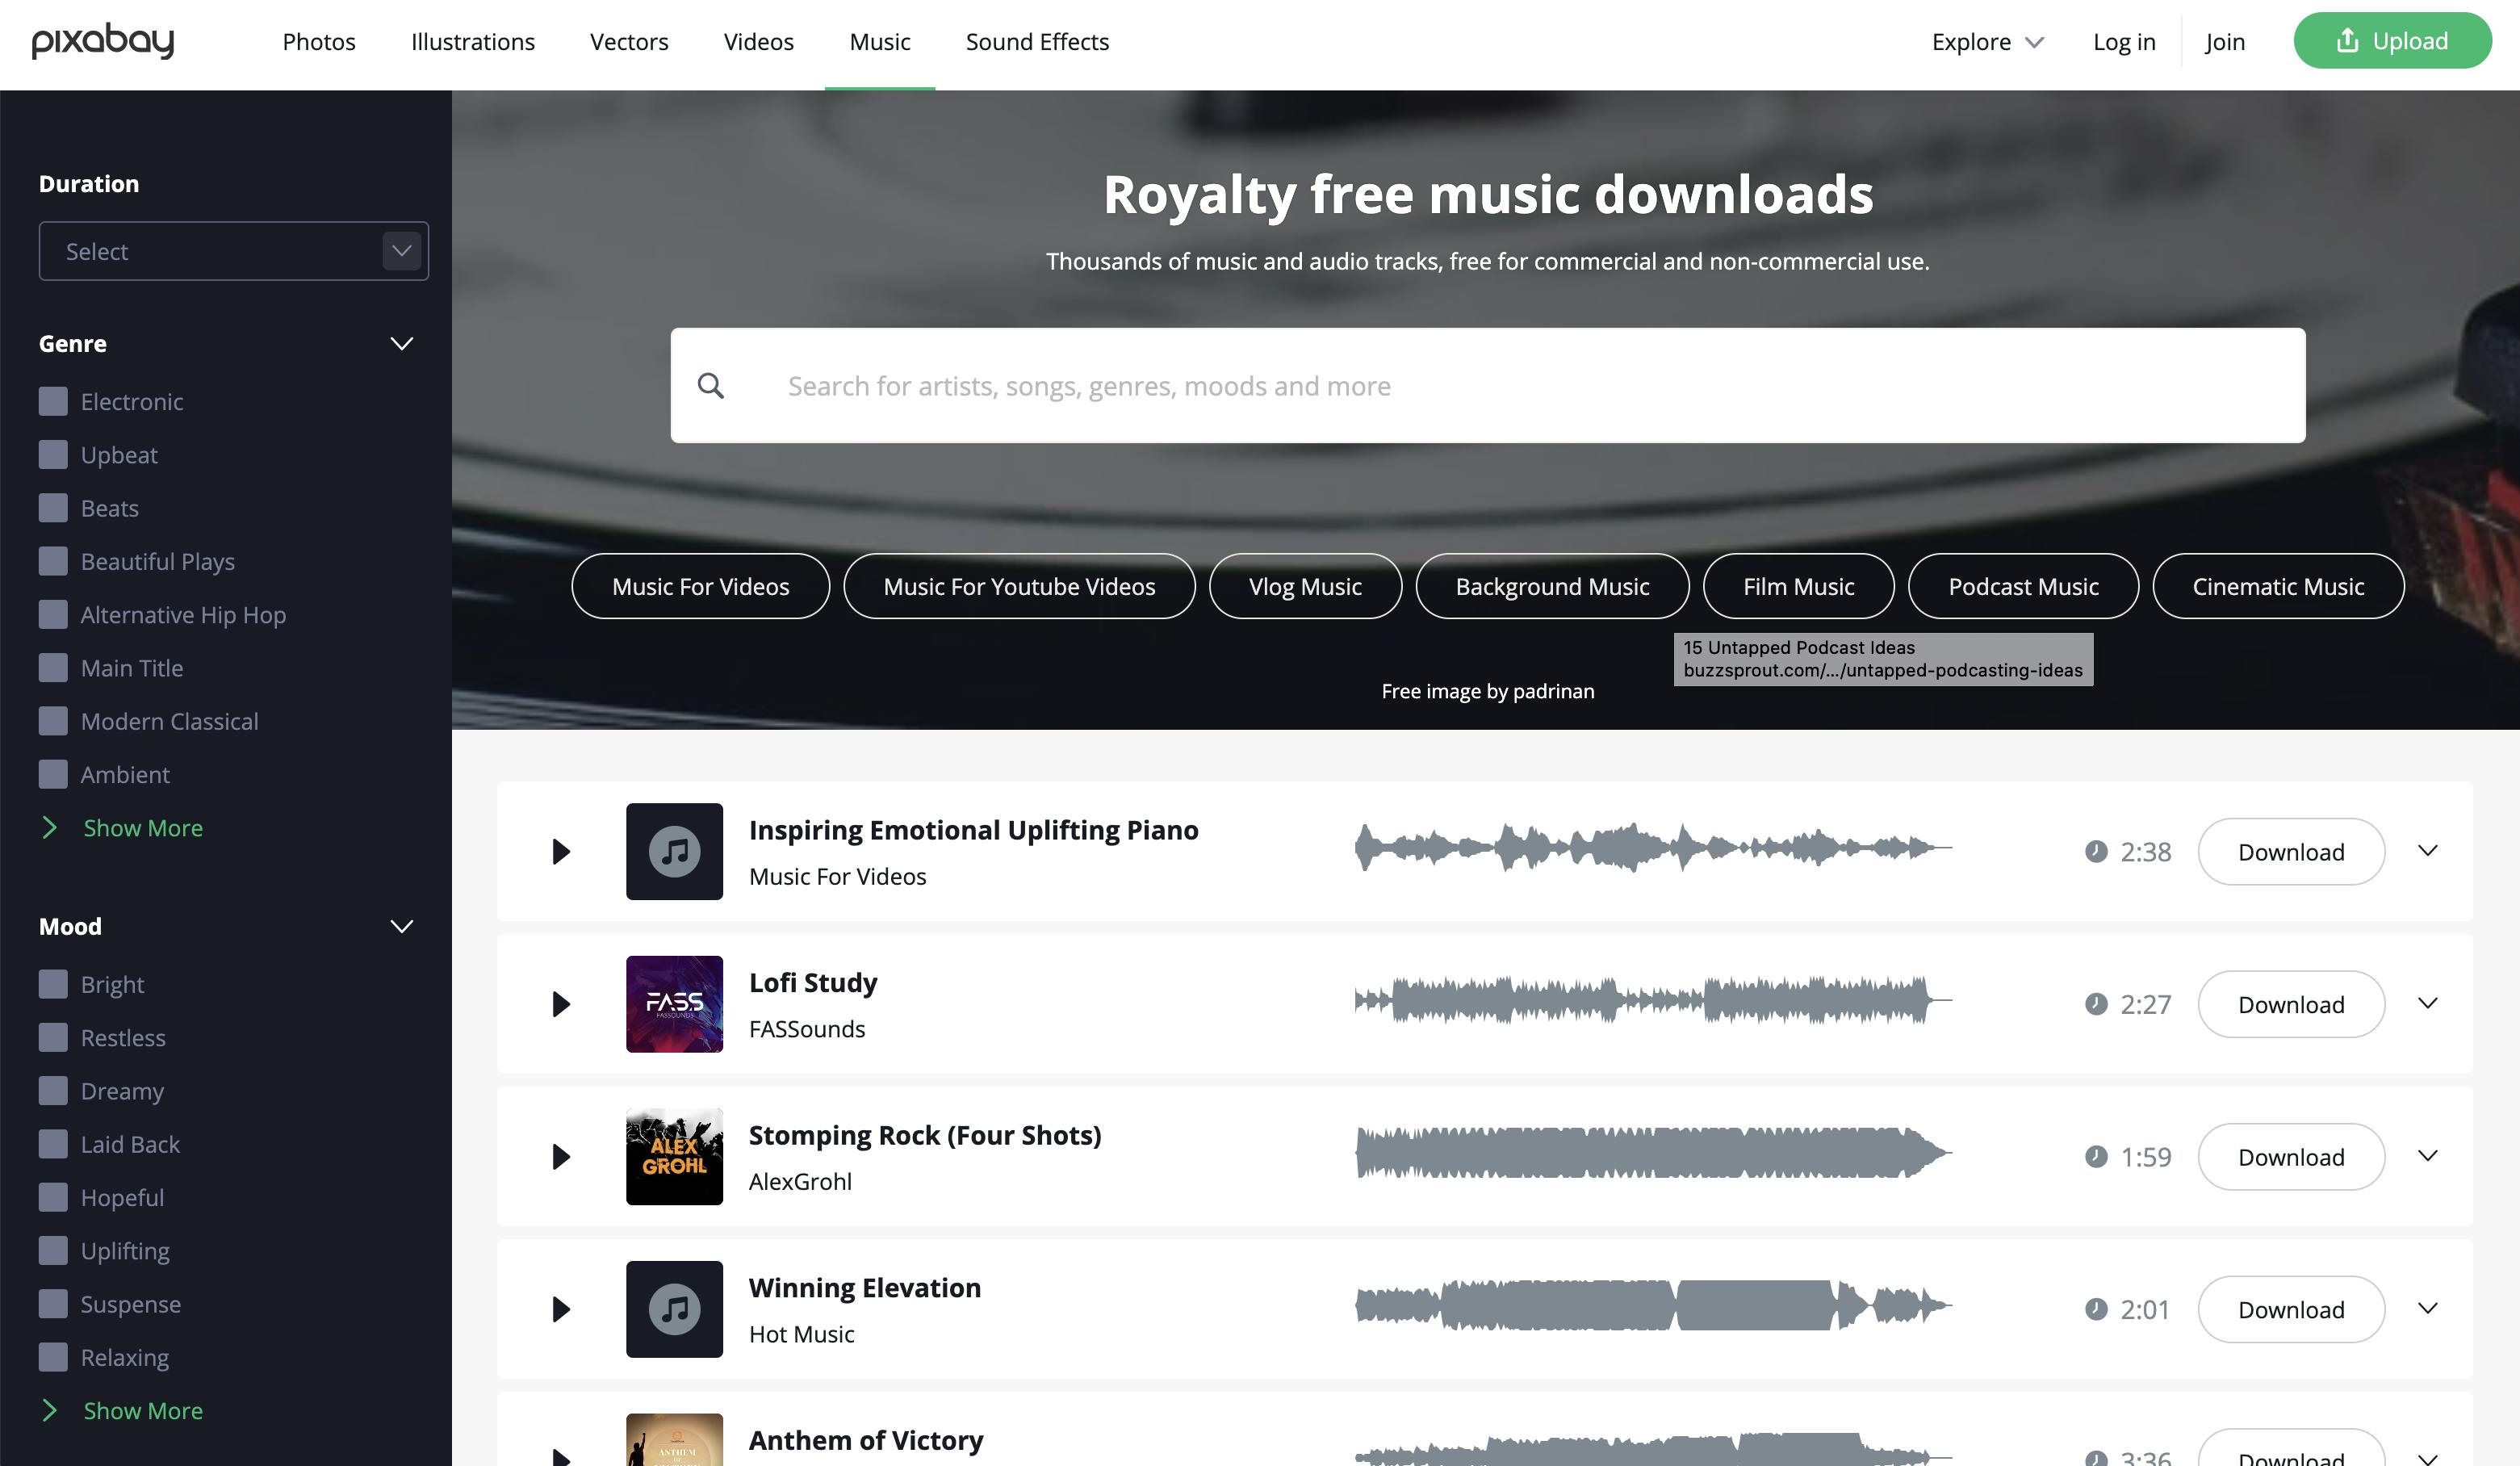 Pixabay royalty free music downloadds page